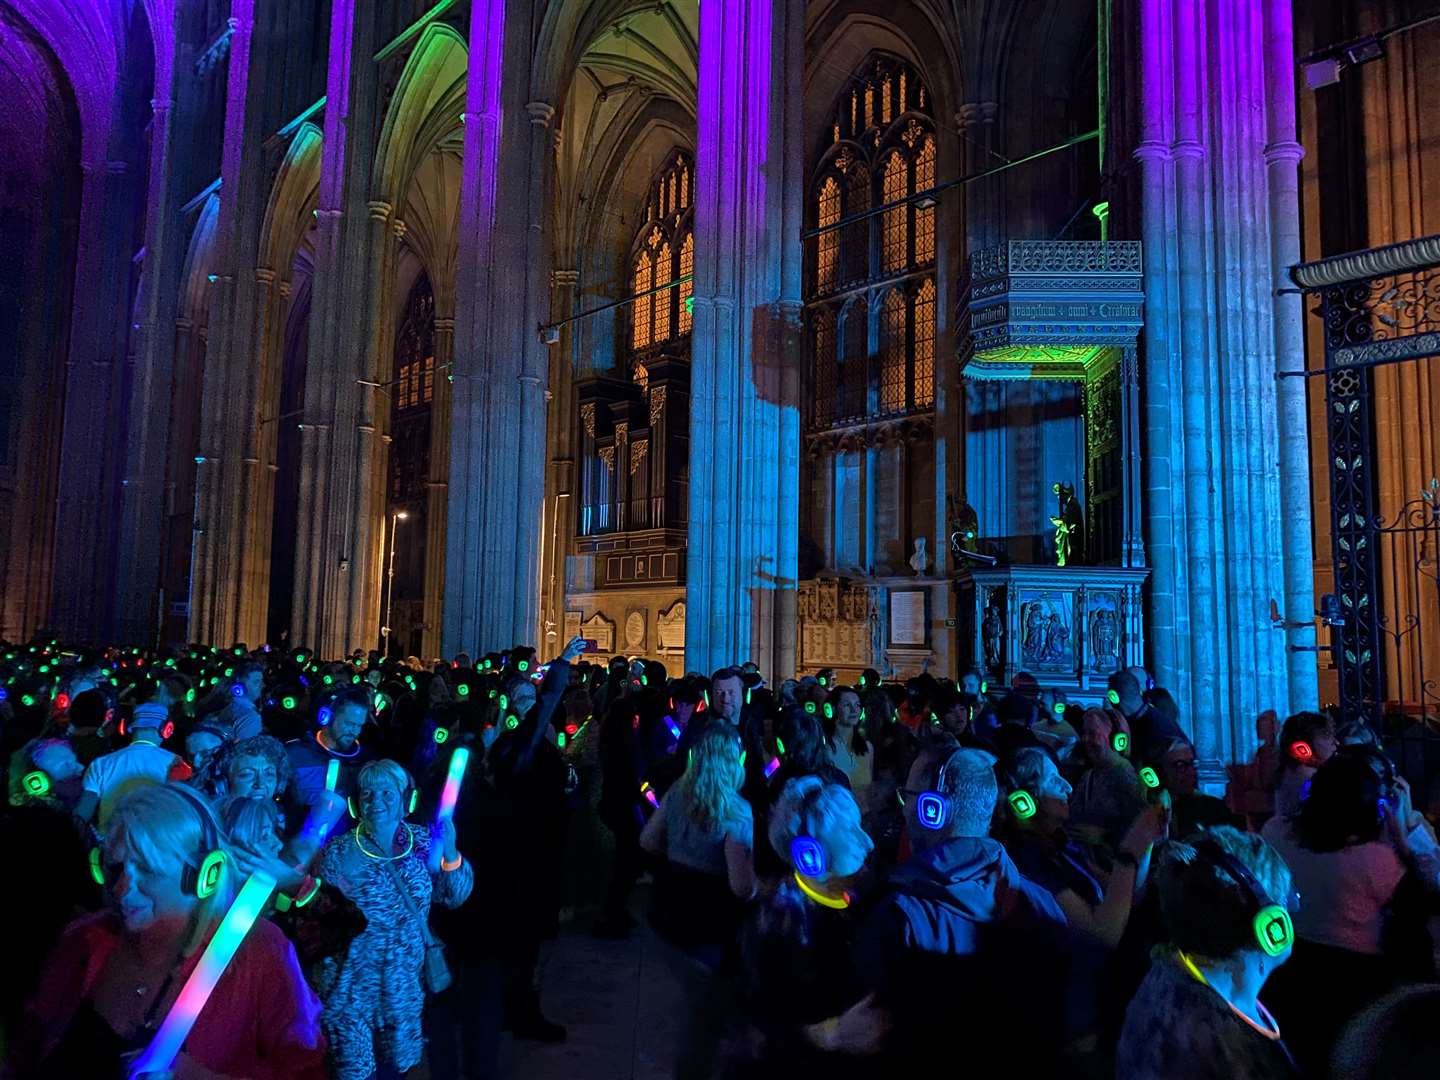 The silent disco in the Cathedral has caused controversy